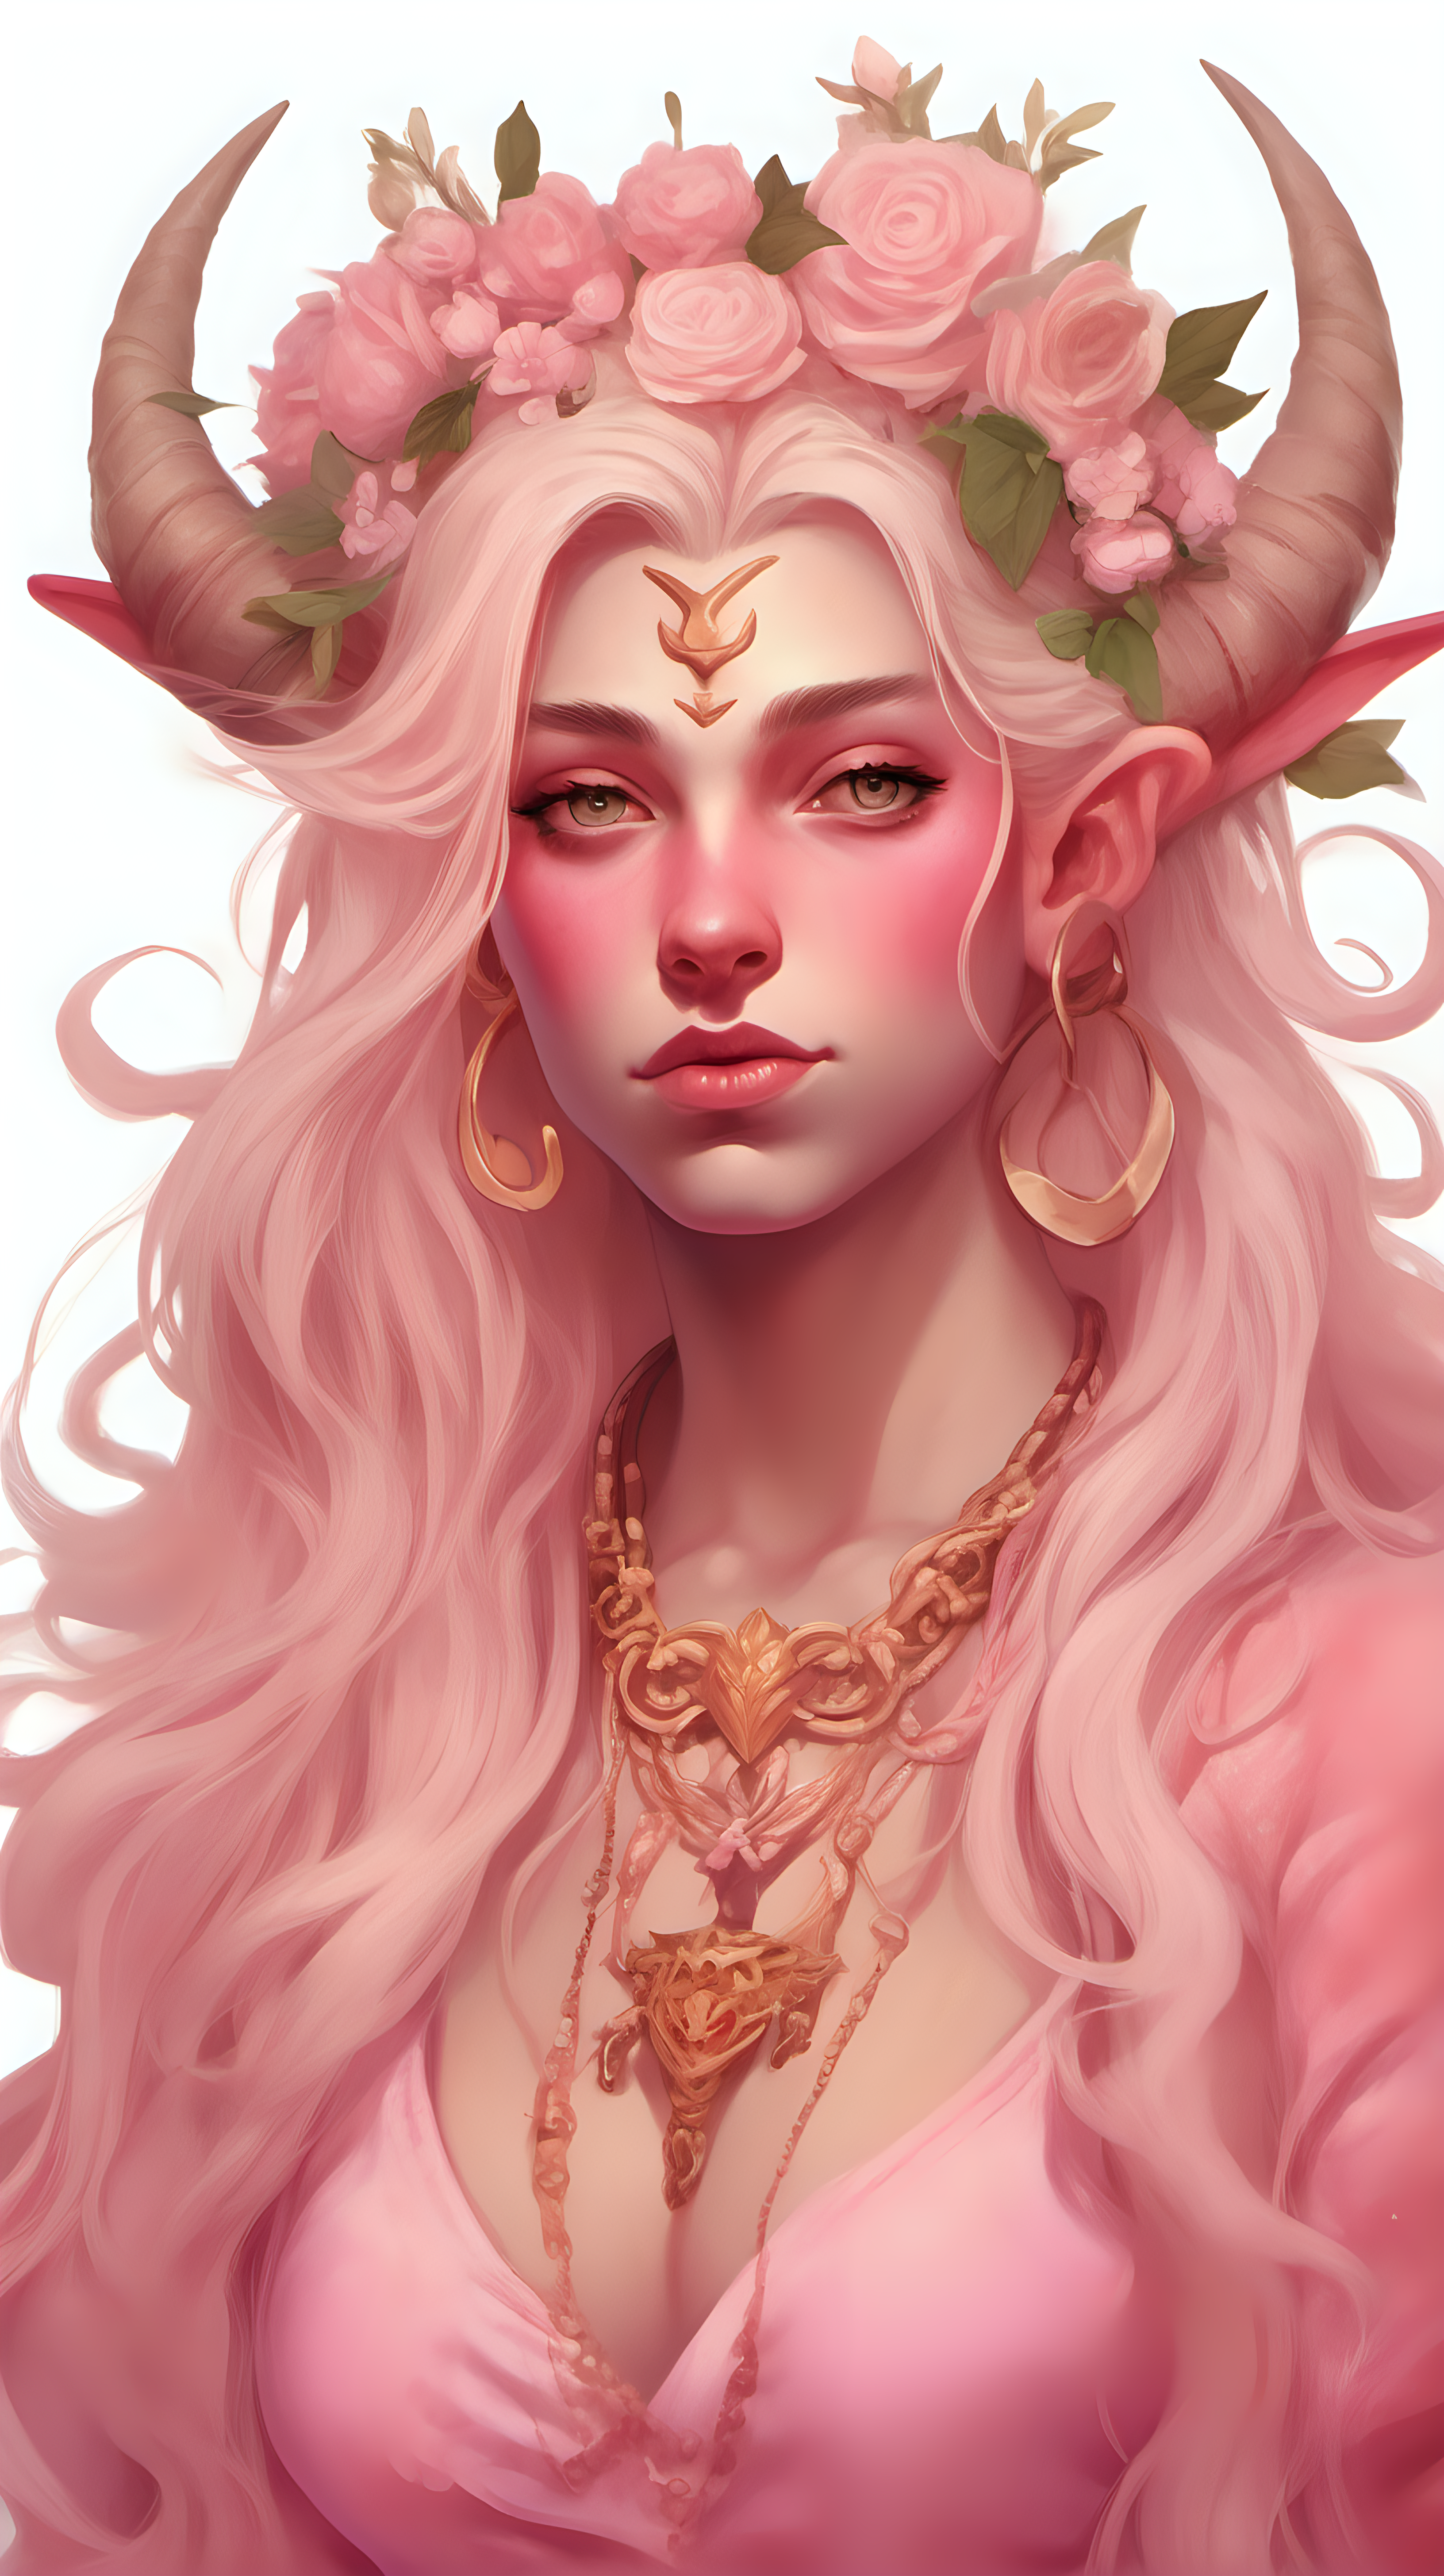 Tiefling woman with pink skin. She has white horns that meet at the top of her head to form a heart. She has light pink eyes. She has light blonde eyelashes. Her eyelashes are not black. She has blonde long hair with a orange tint. She is wearing a pink Greek-style dress with lots of flowers. She is wearing gold jewelry. She is holding a bouquet of pink flowers. She has an annoyed expression. 